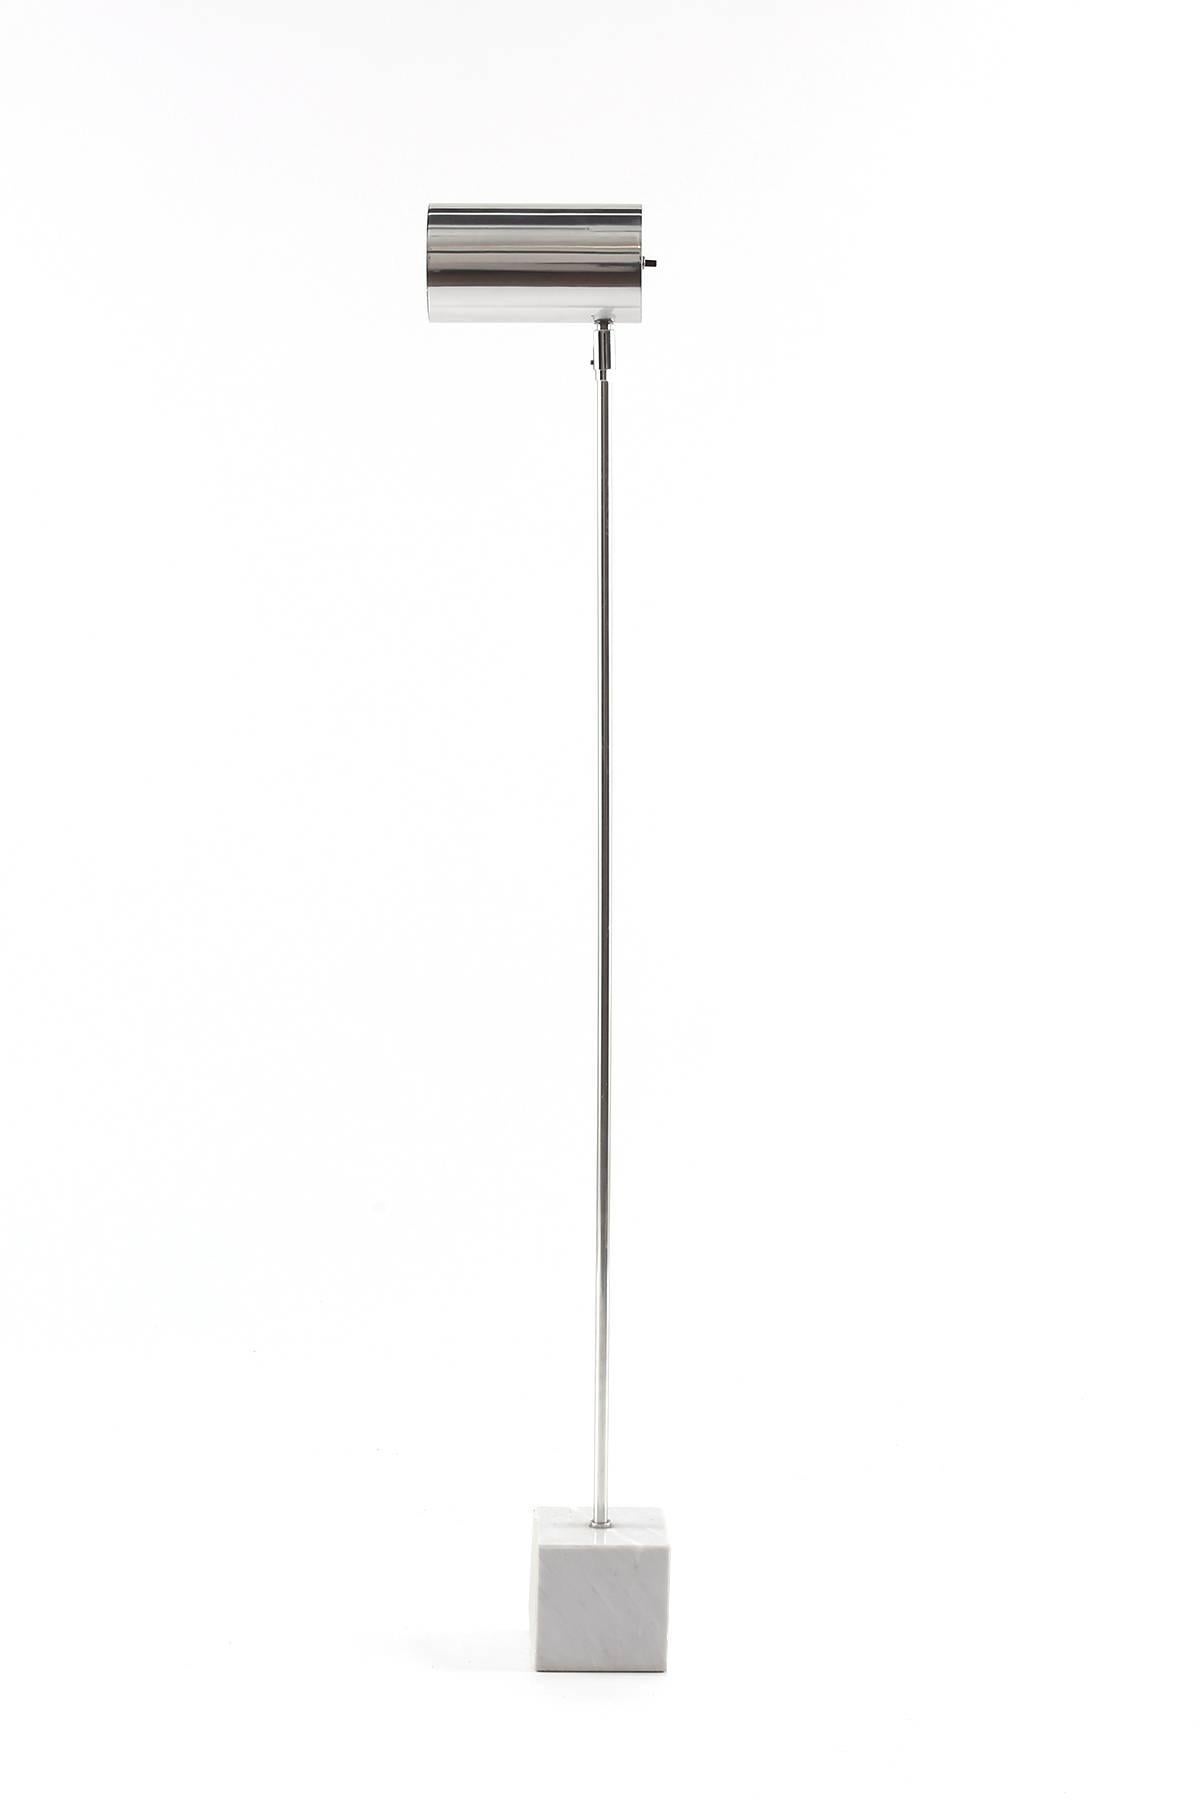 Kovacs calacatta marble and chrome floor lamp circa early 1970s. This example has a pivoting tubular chrome head and solid marble base.